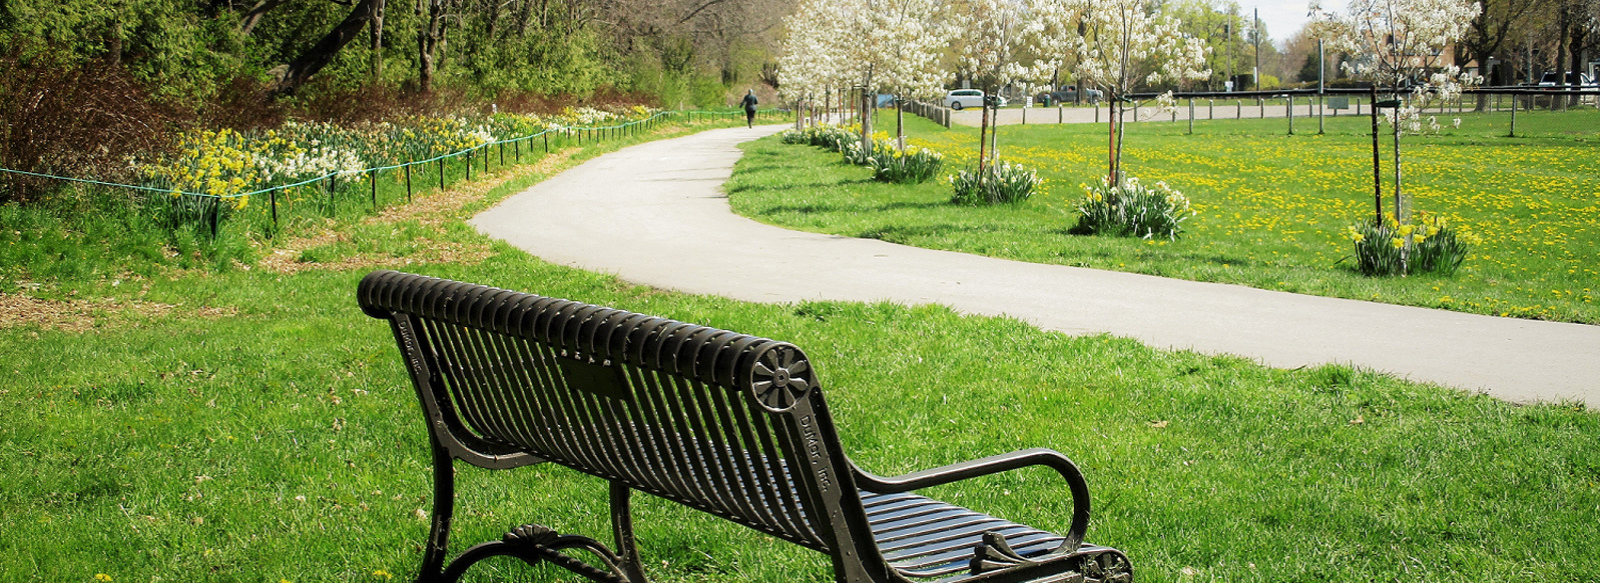 Bench at park in spring with blooming trees 